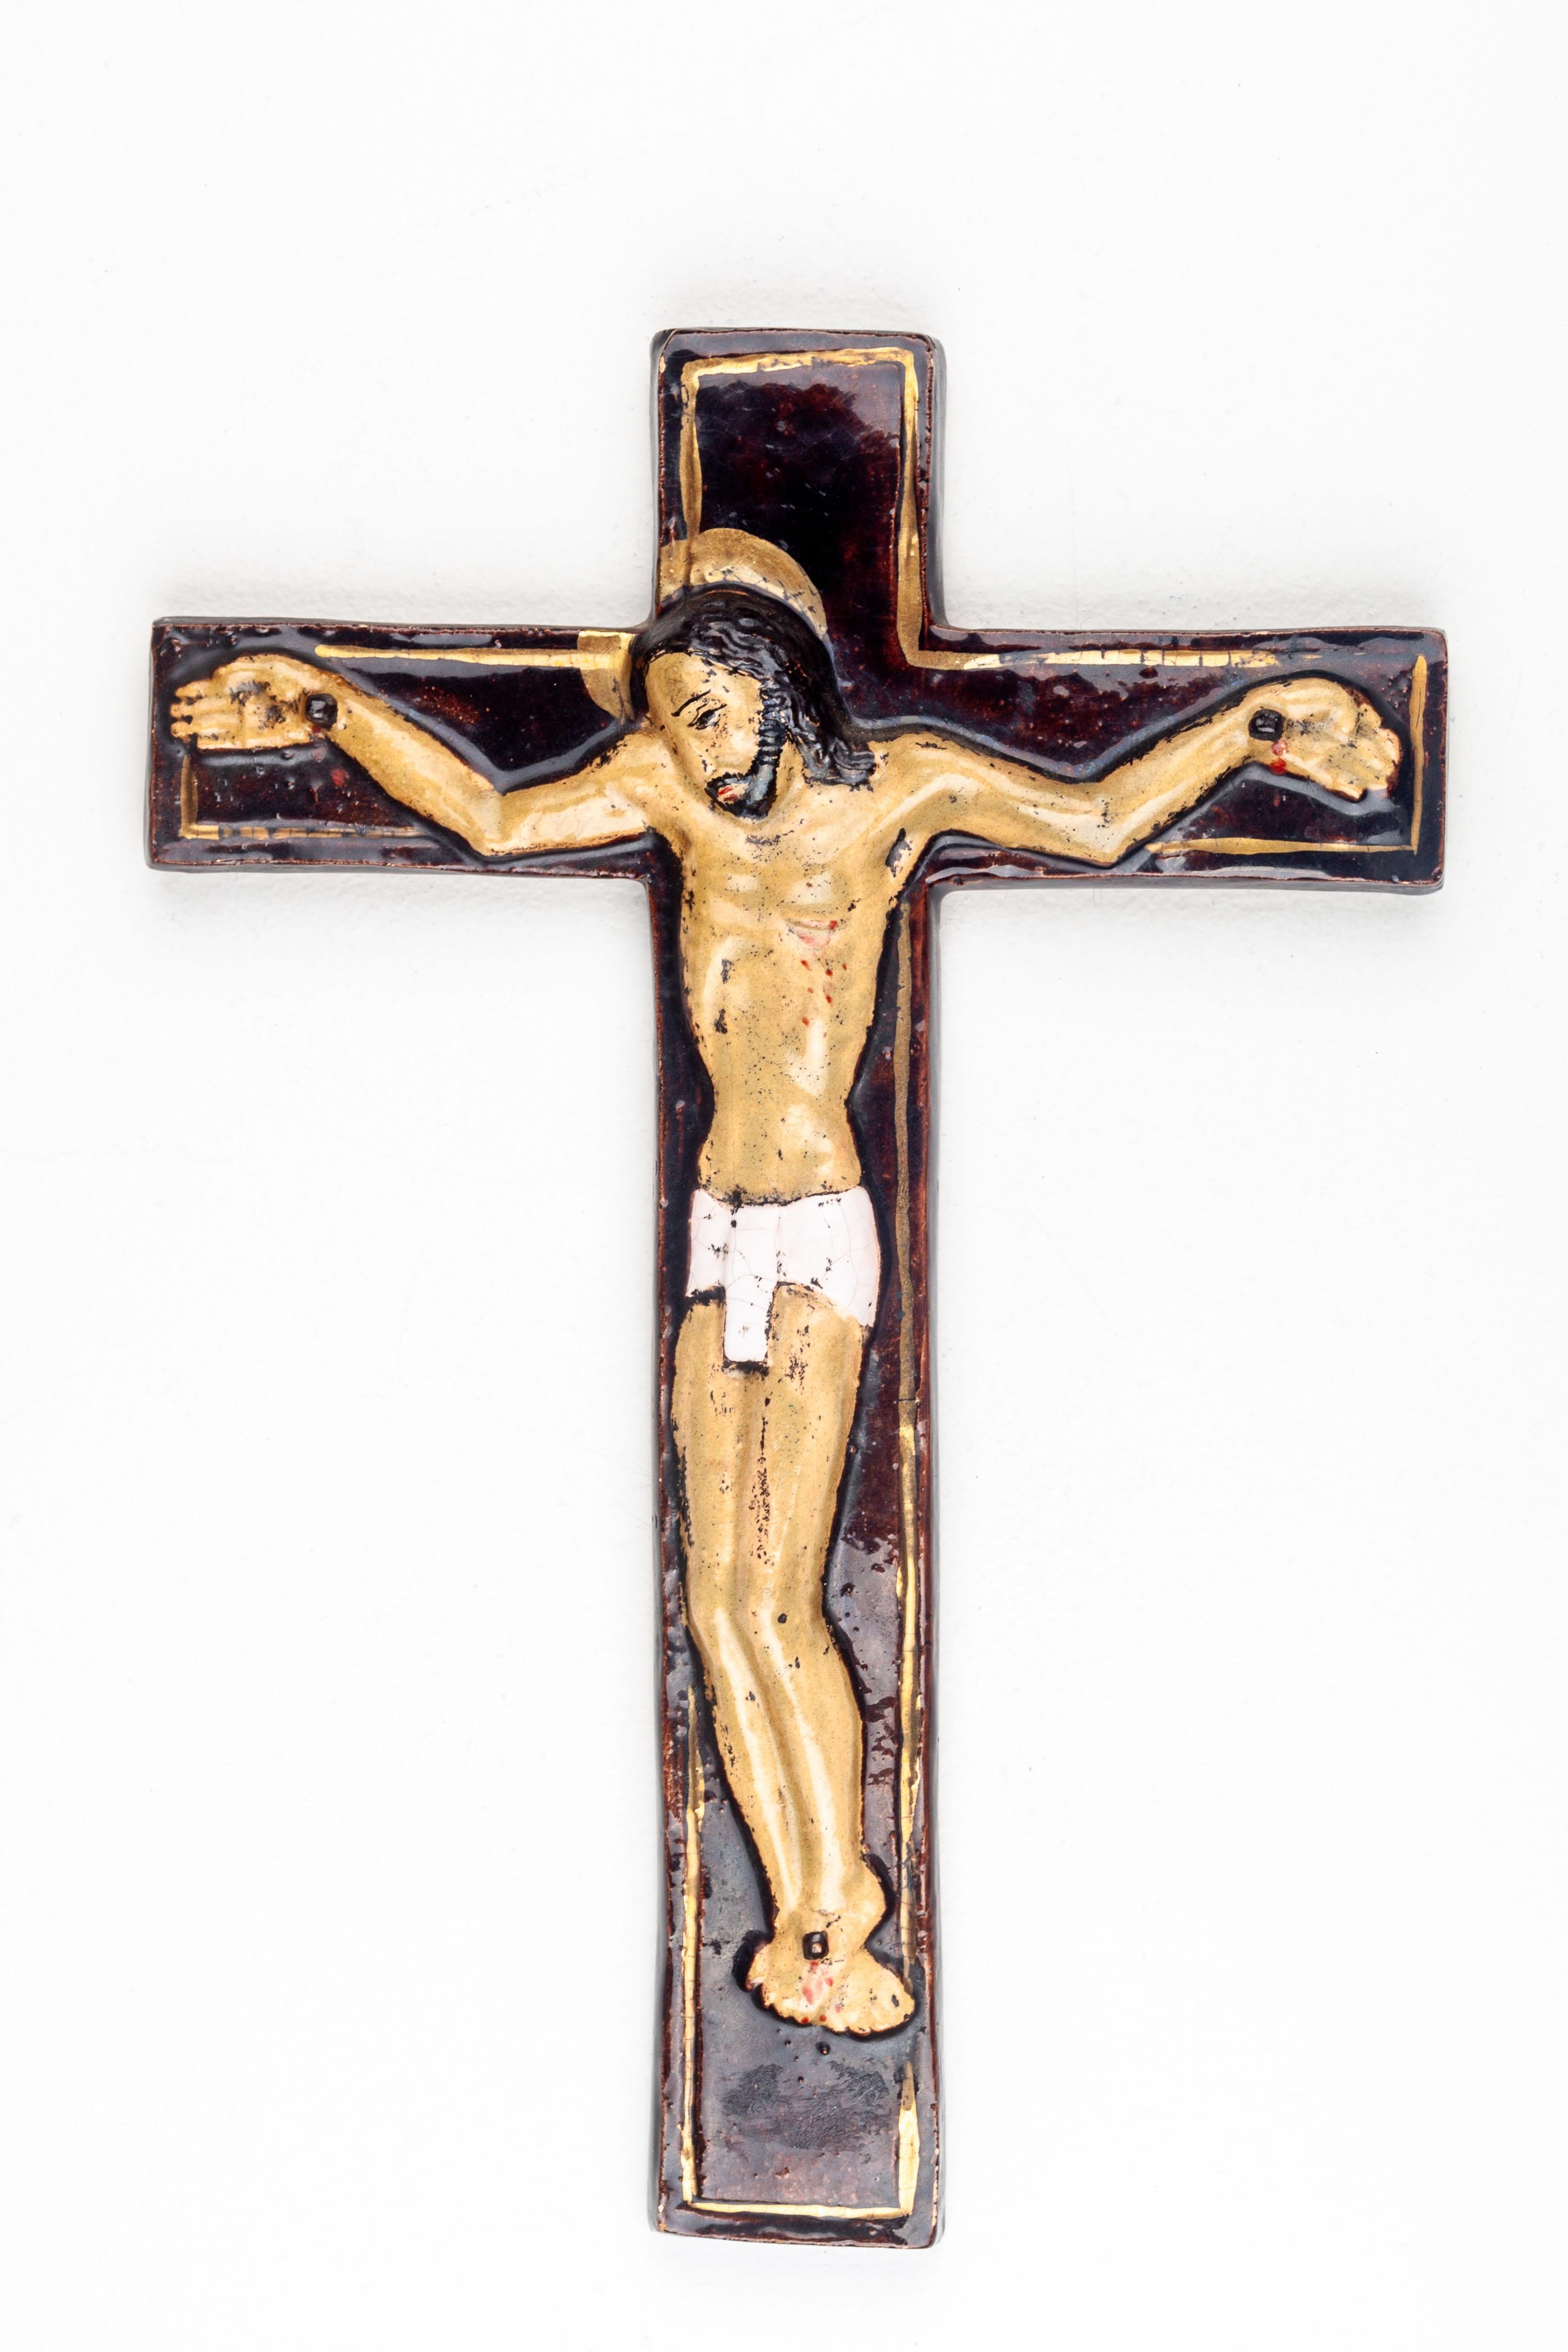 This mid-century modern crucifix is a poignant example of European studio pottery that combines the spiritual gravitas of religious art with the aesthetic principles of the era. The figure of Christ is rendered with a simplified realism, capturing